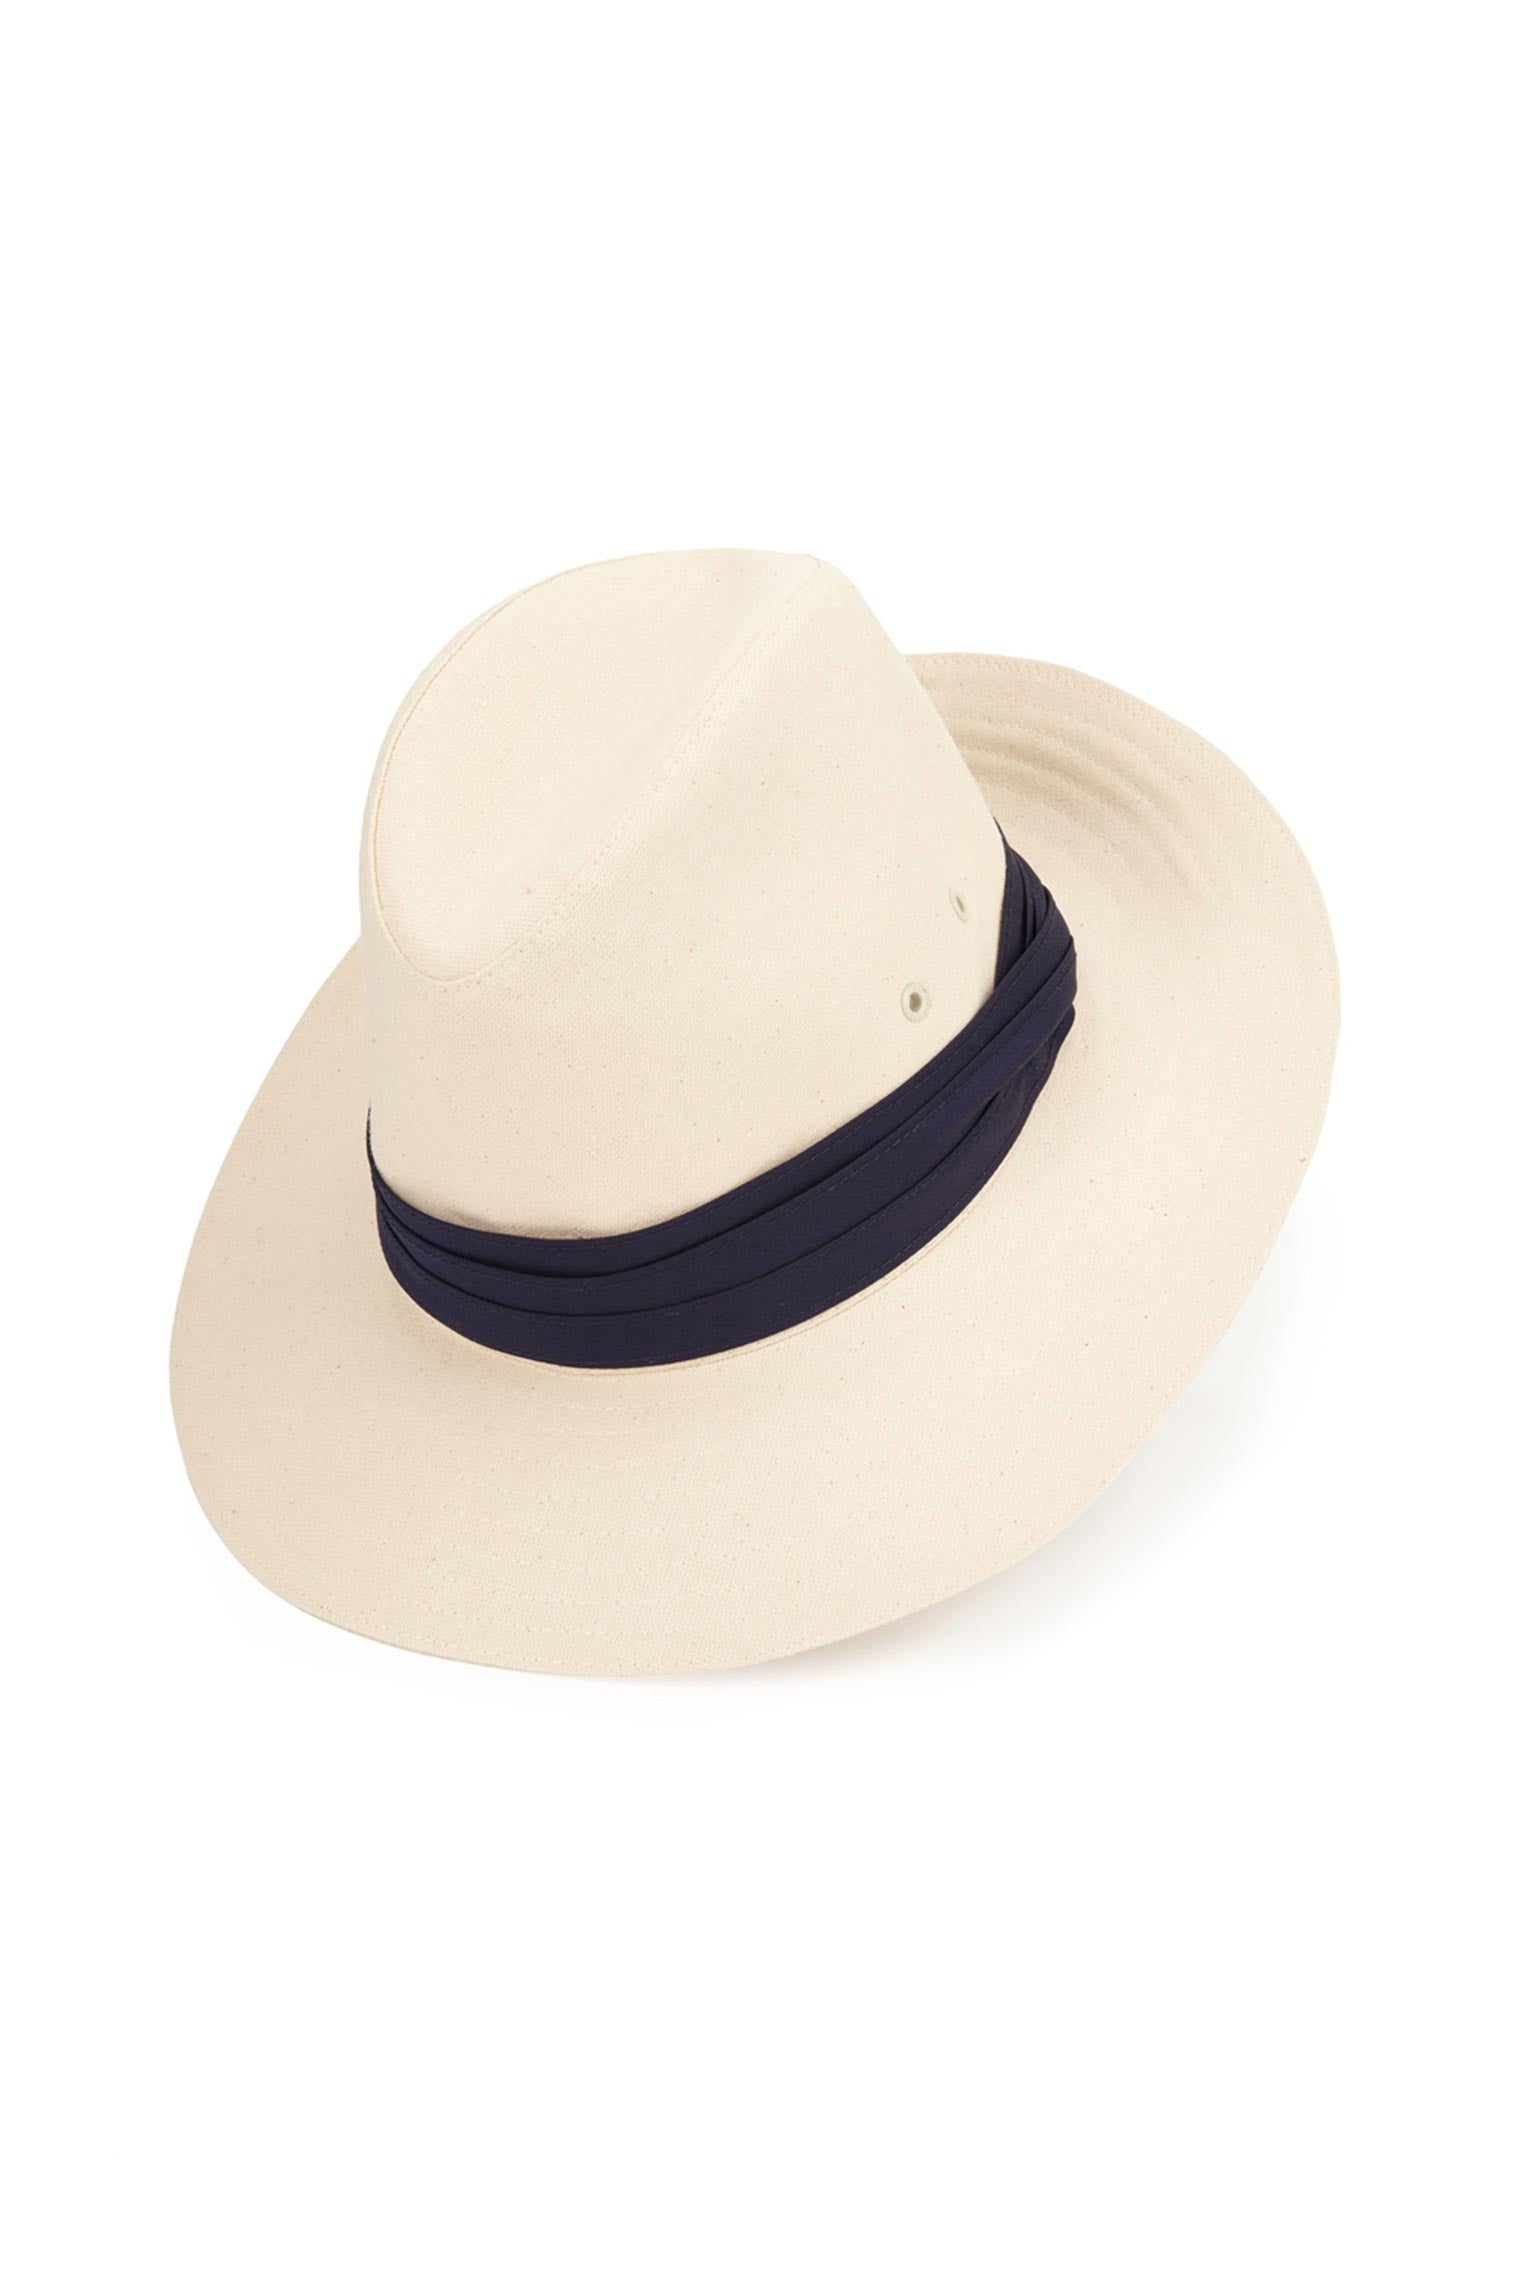 Namibia Calico Fedora - All Ready to Wear - Lock & Co. Hatters London UK